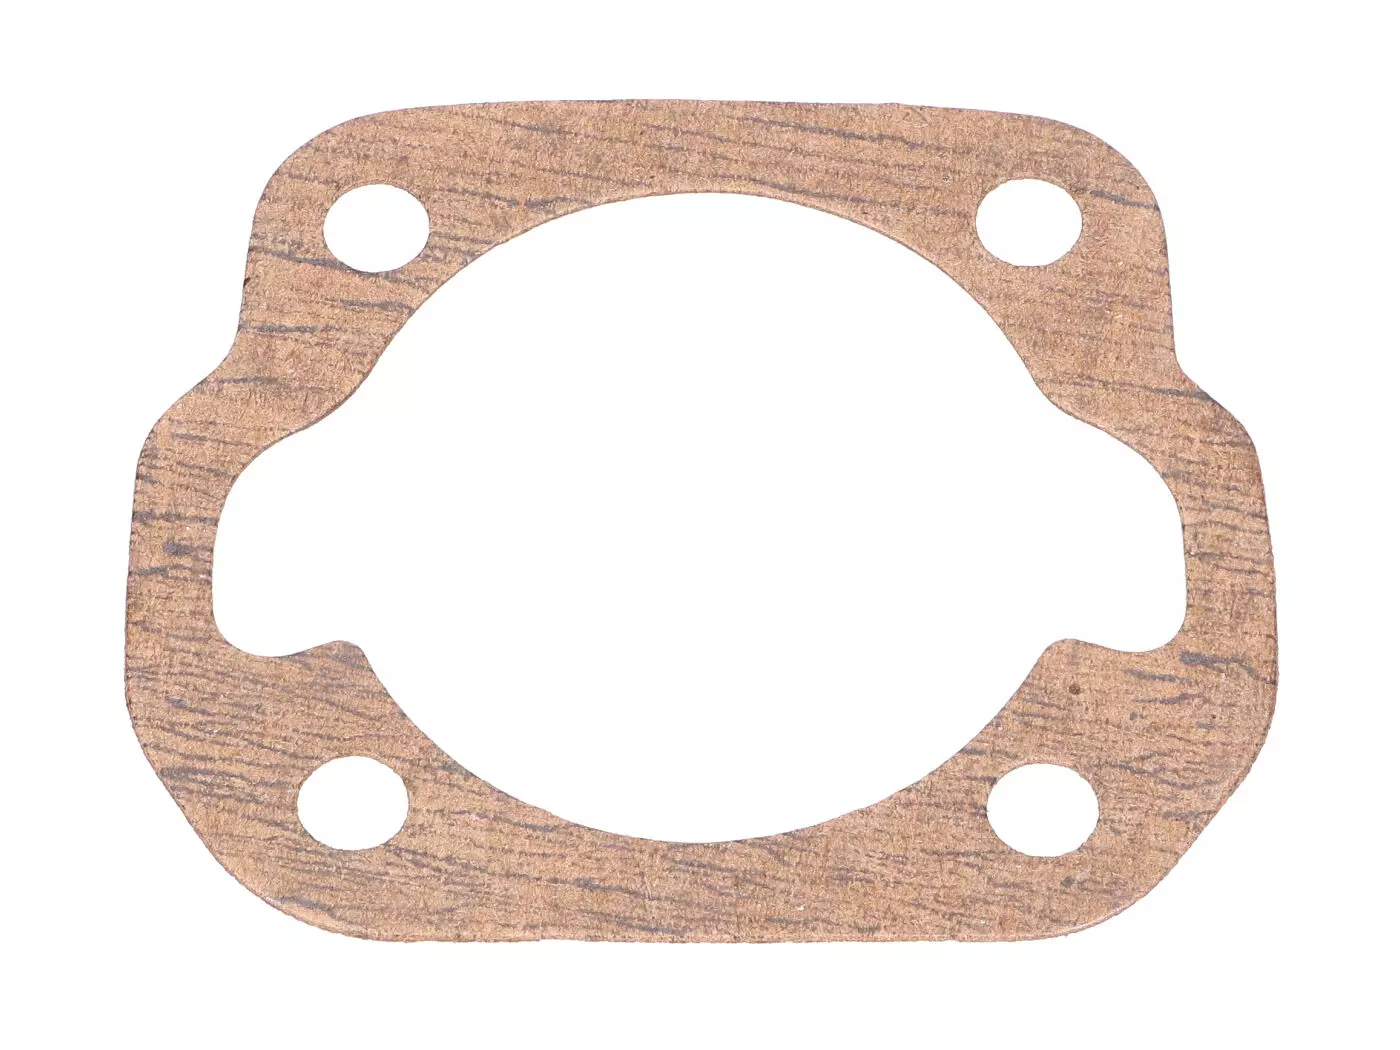 Cylinder Base Gasket 70cc 0.5mm For Puch Maxi, X30 Automatic